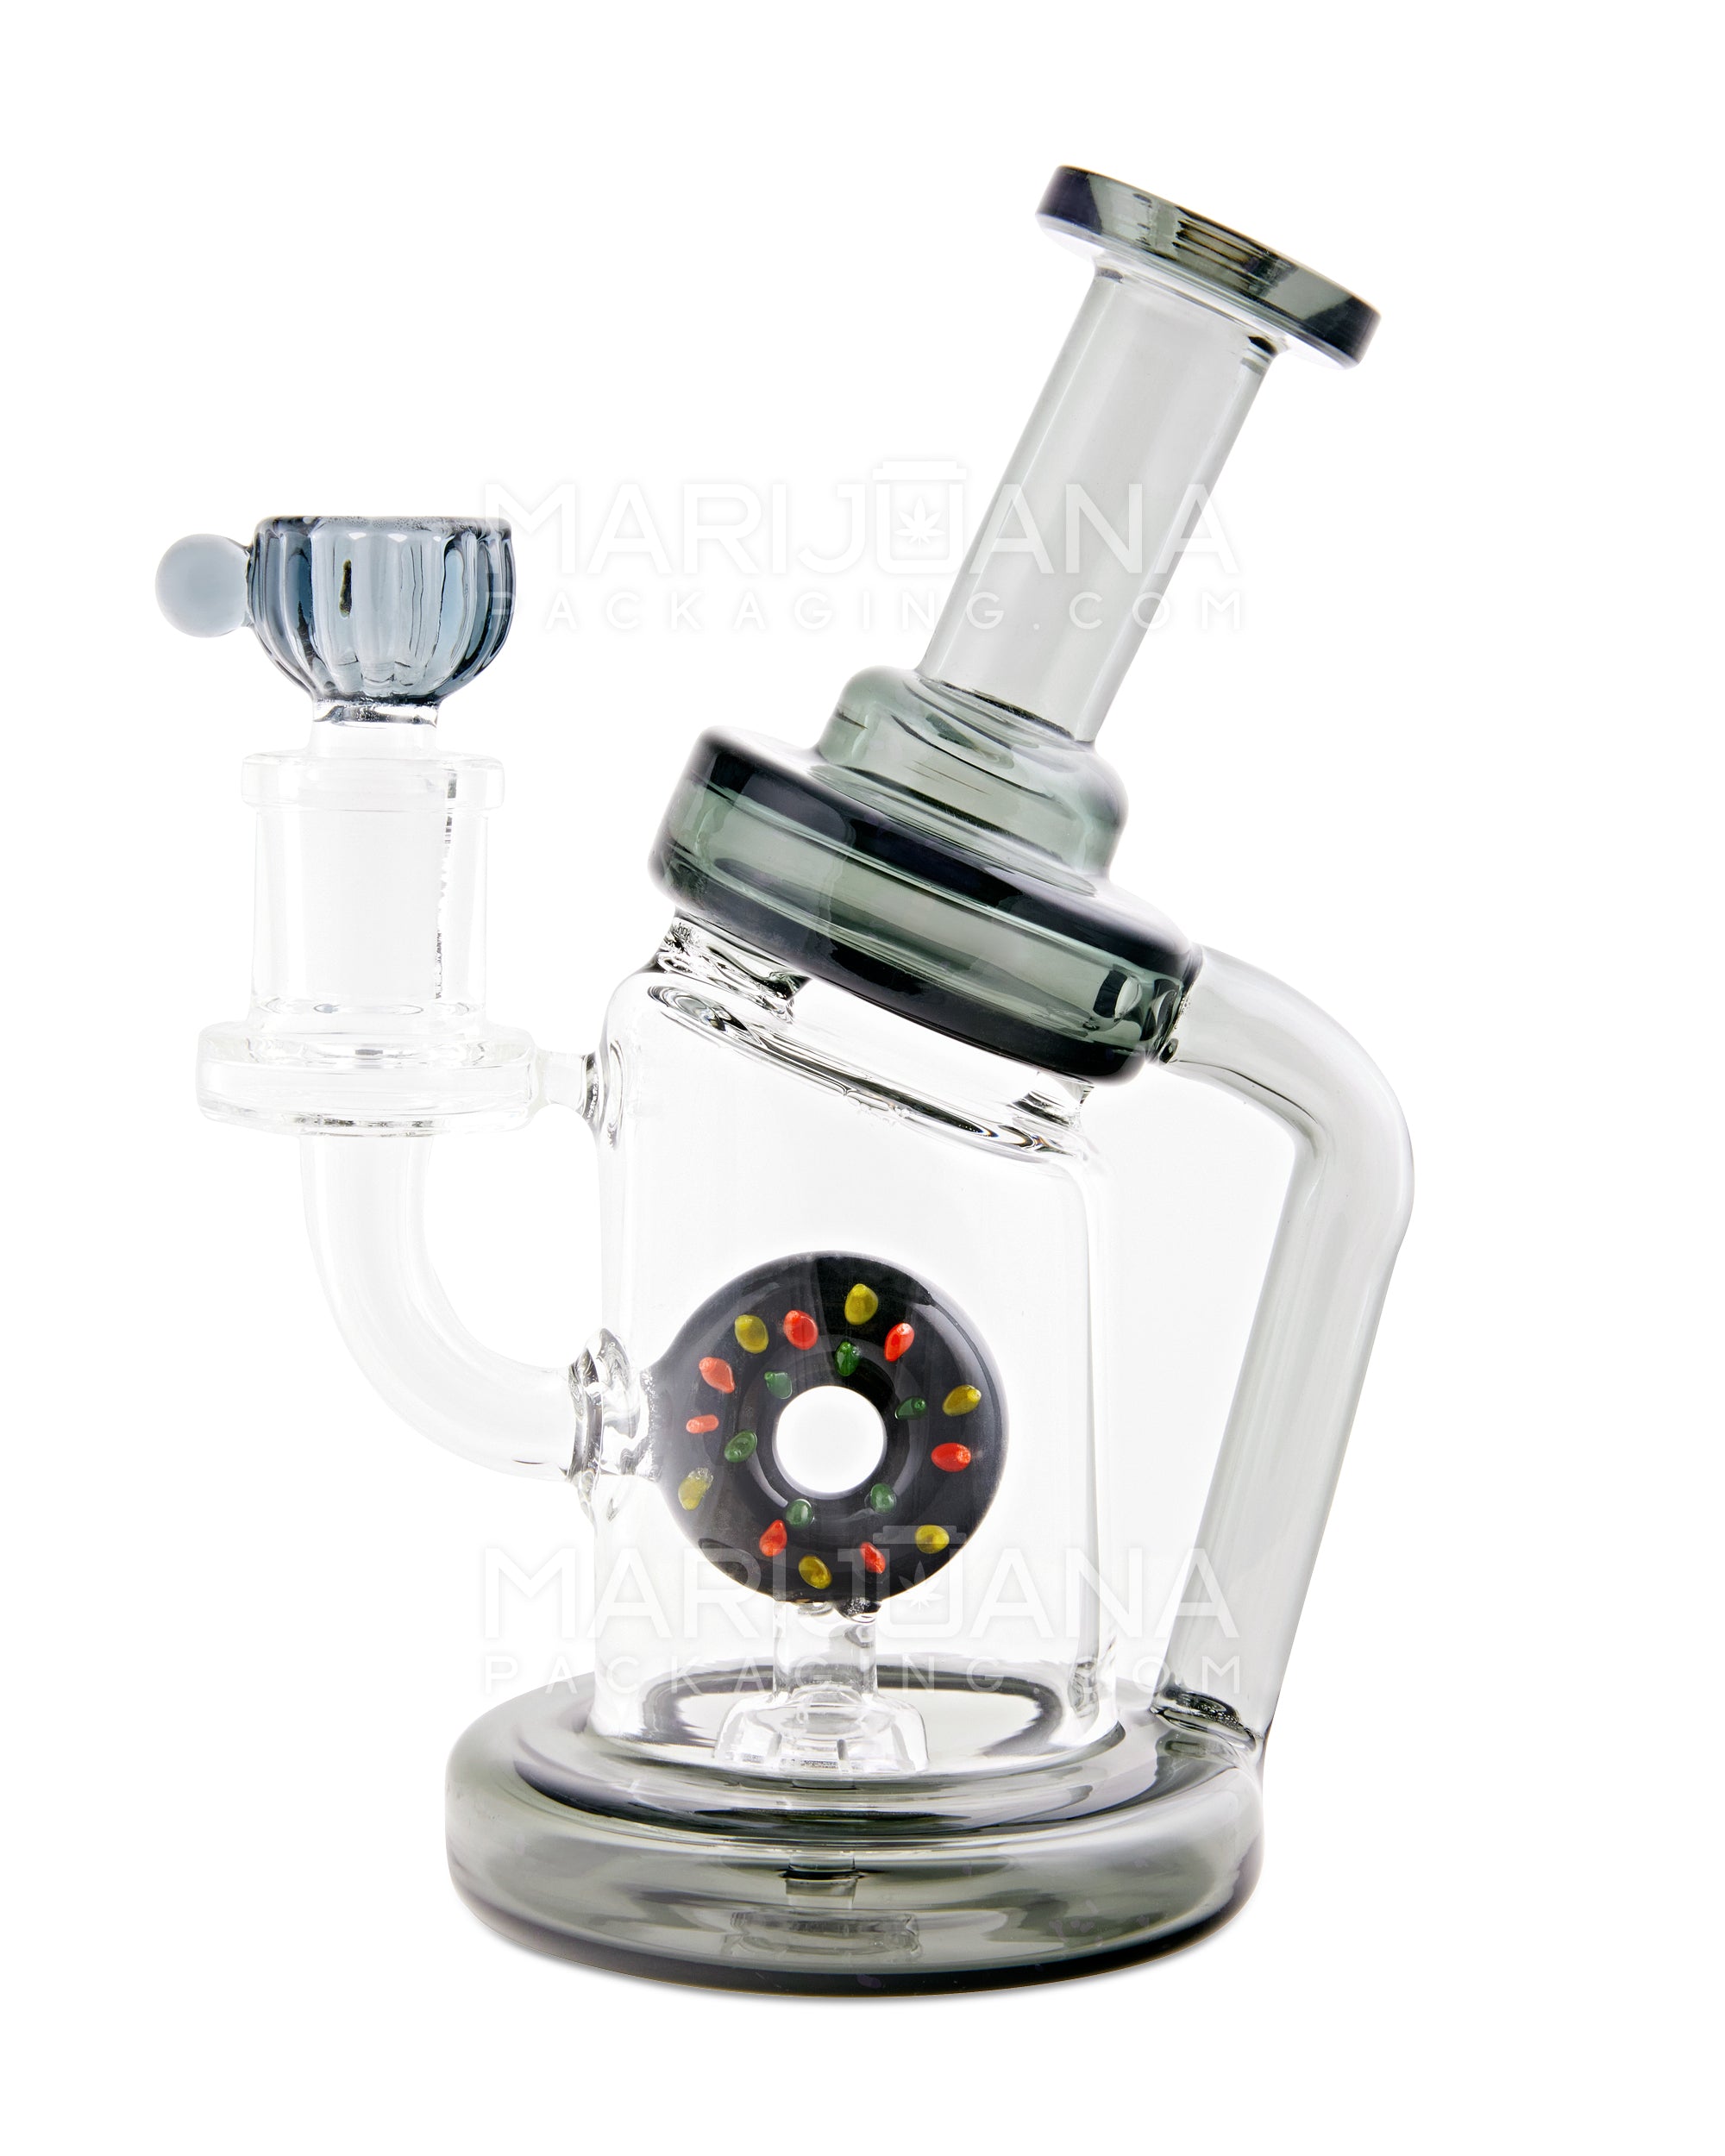 USA Glass | Bent Neck Laidback Recycler Water Pipe w/ Donut Showerhead Percolator | 7in Tall - 14mm Bowl - Smoke